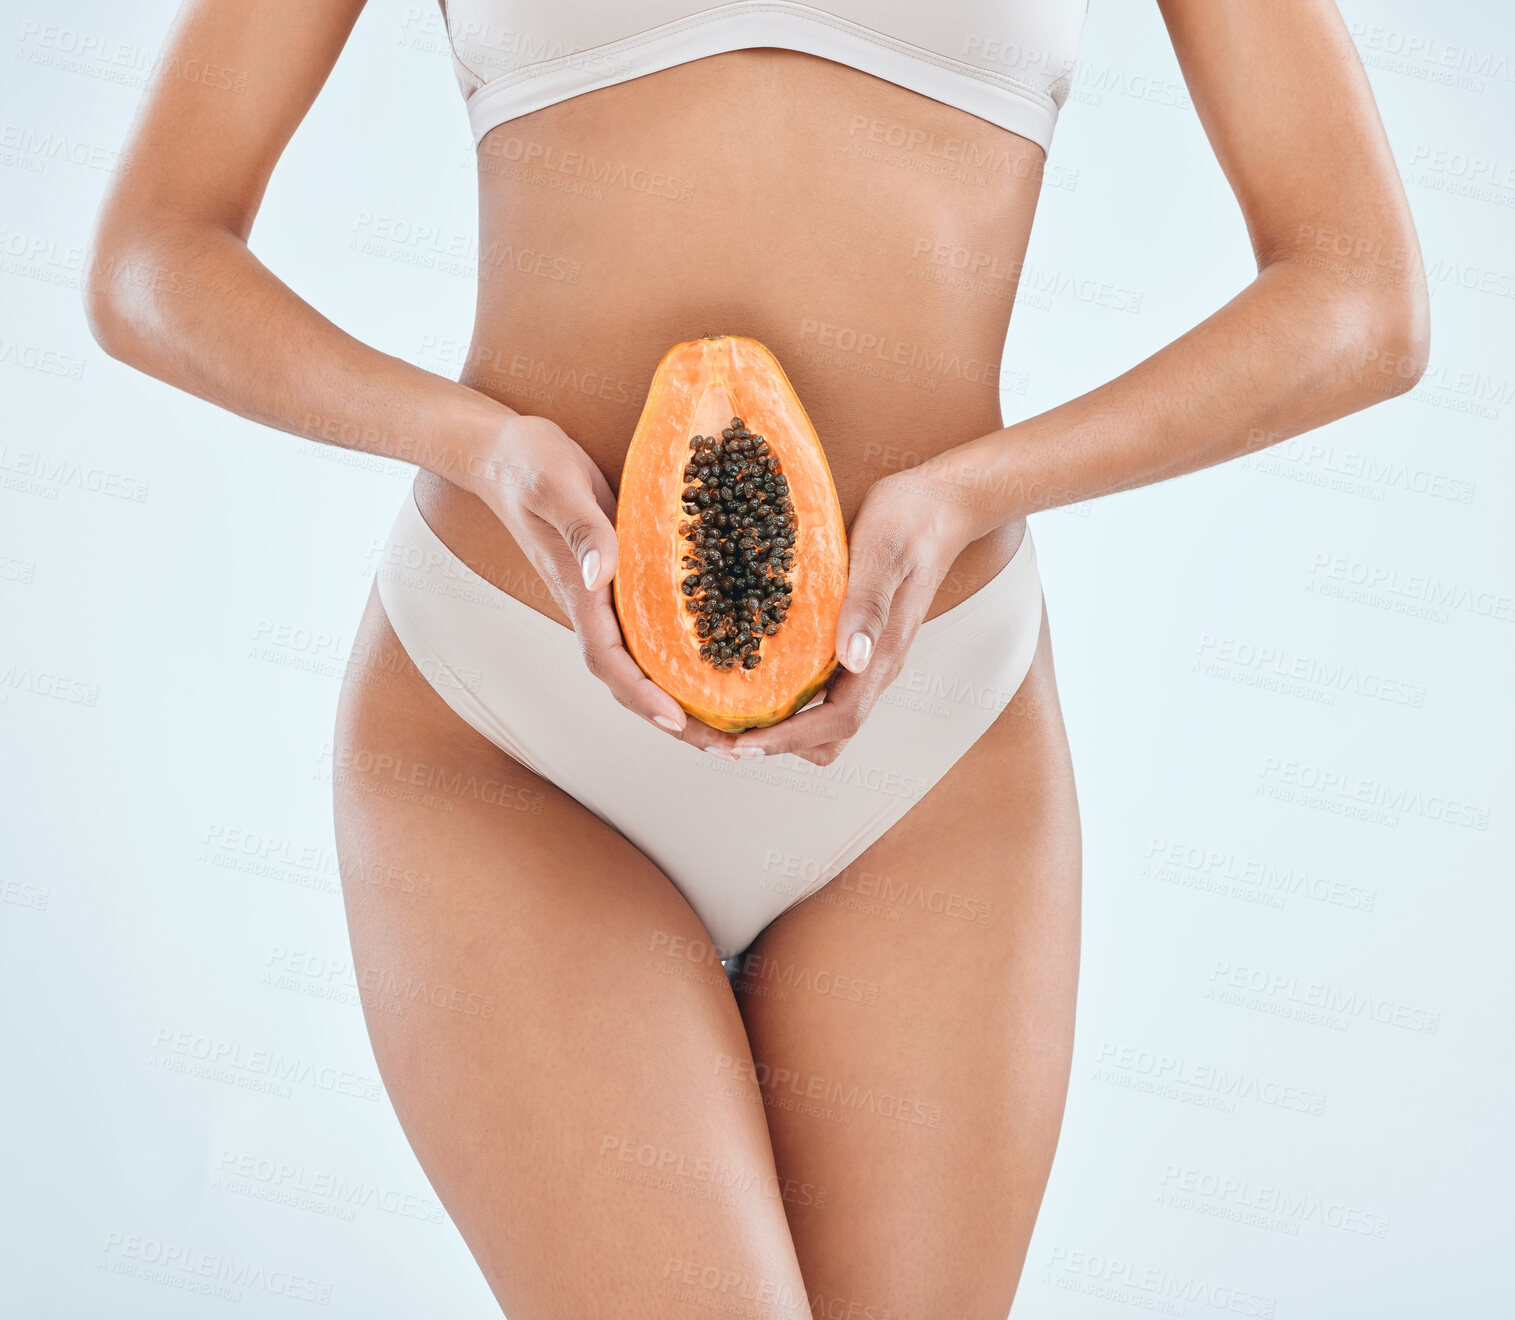 Buy stock photo Cropped shot of an unrecognisable woman standing alone in the studio and posing while holding a papaya